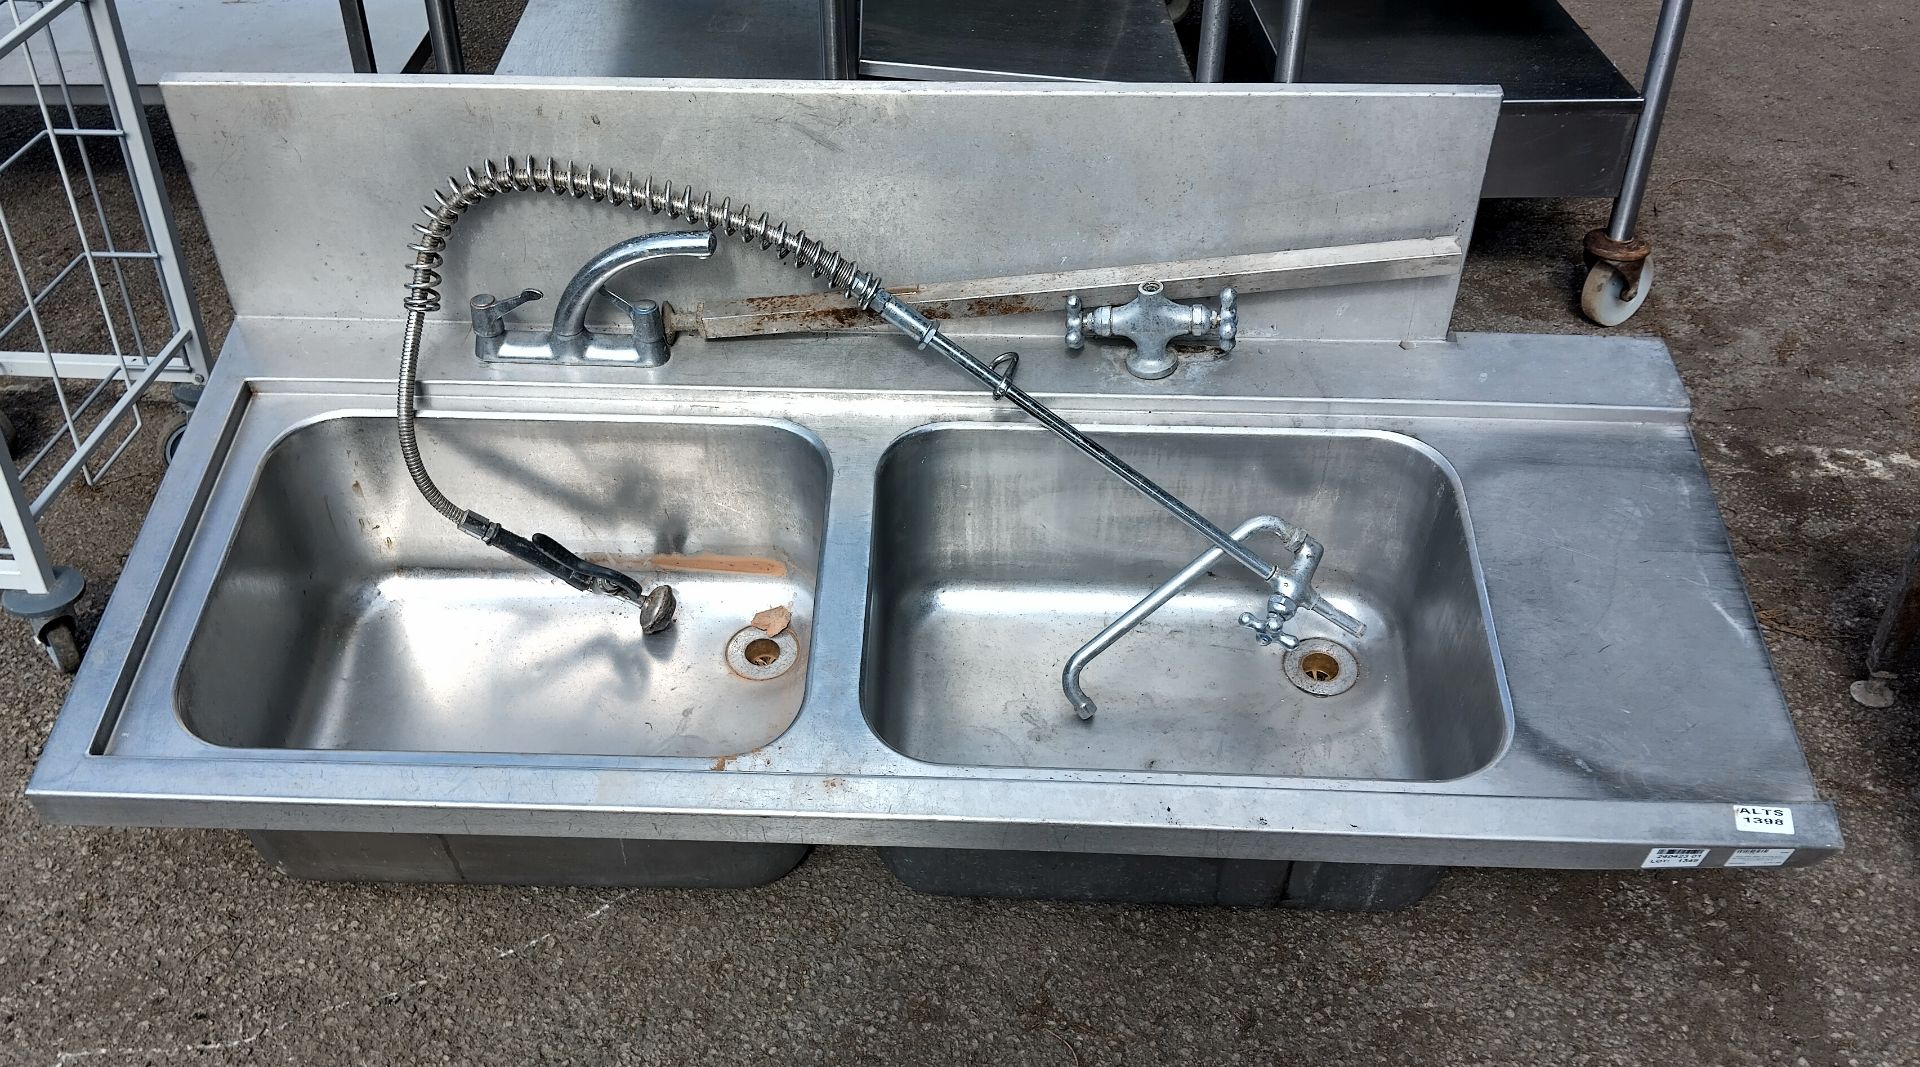 Stainless steel double sink - W 1550 x D 700 x H 1300mm - DAMAGED LEG